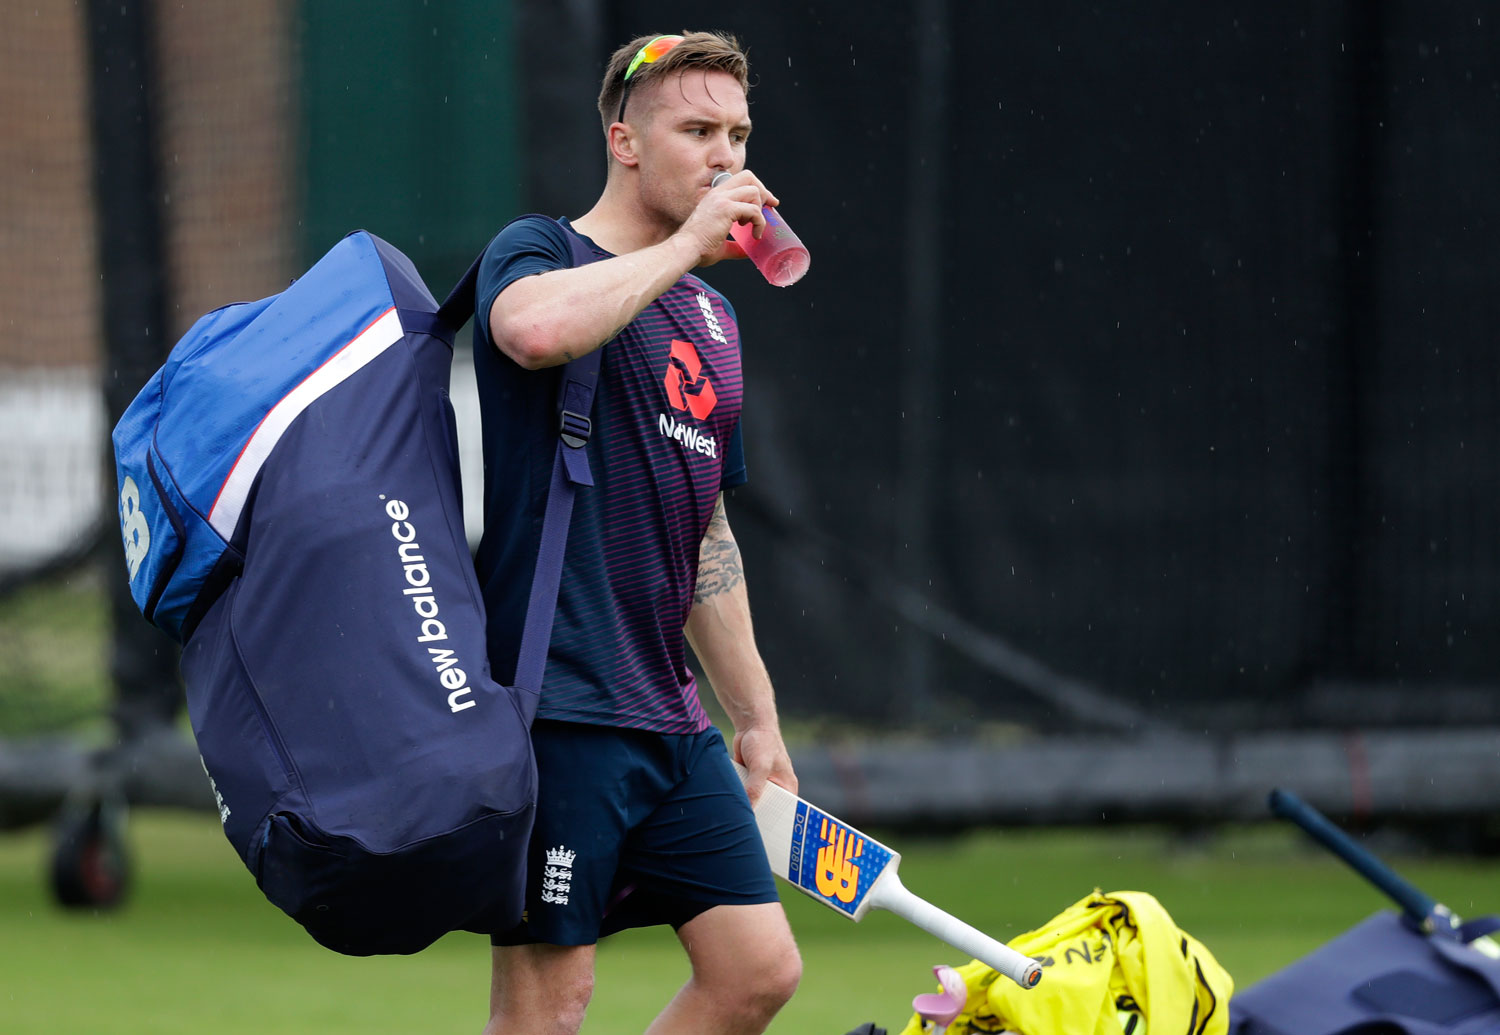 Justin Langer, as Australia’s coach, admits as much in his comments of the last 24 hours which included the line “Jonny Bairstow and Jason Roy (in picture) are a huge part of England’s success and we’ll be doing everything we can to nullify that.”